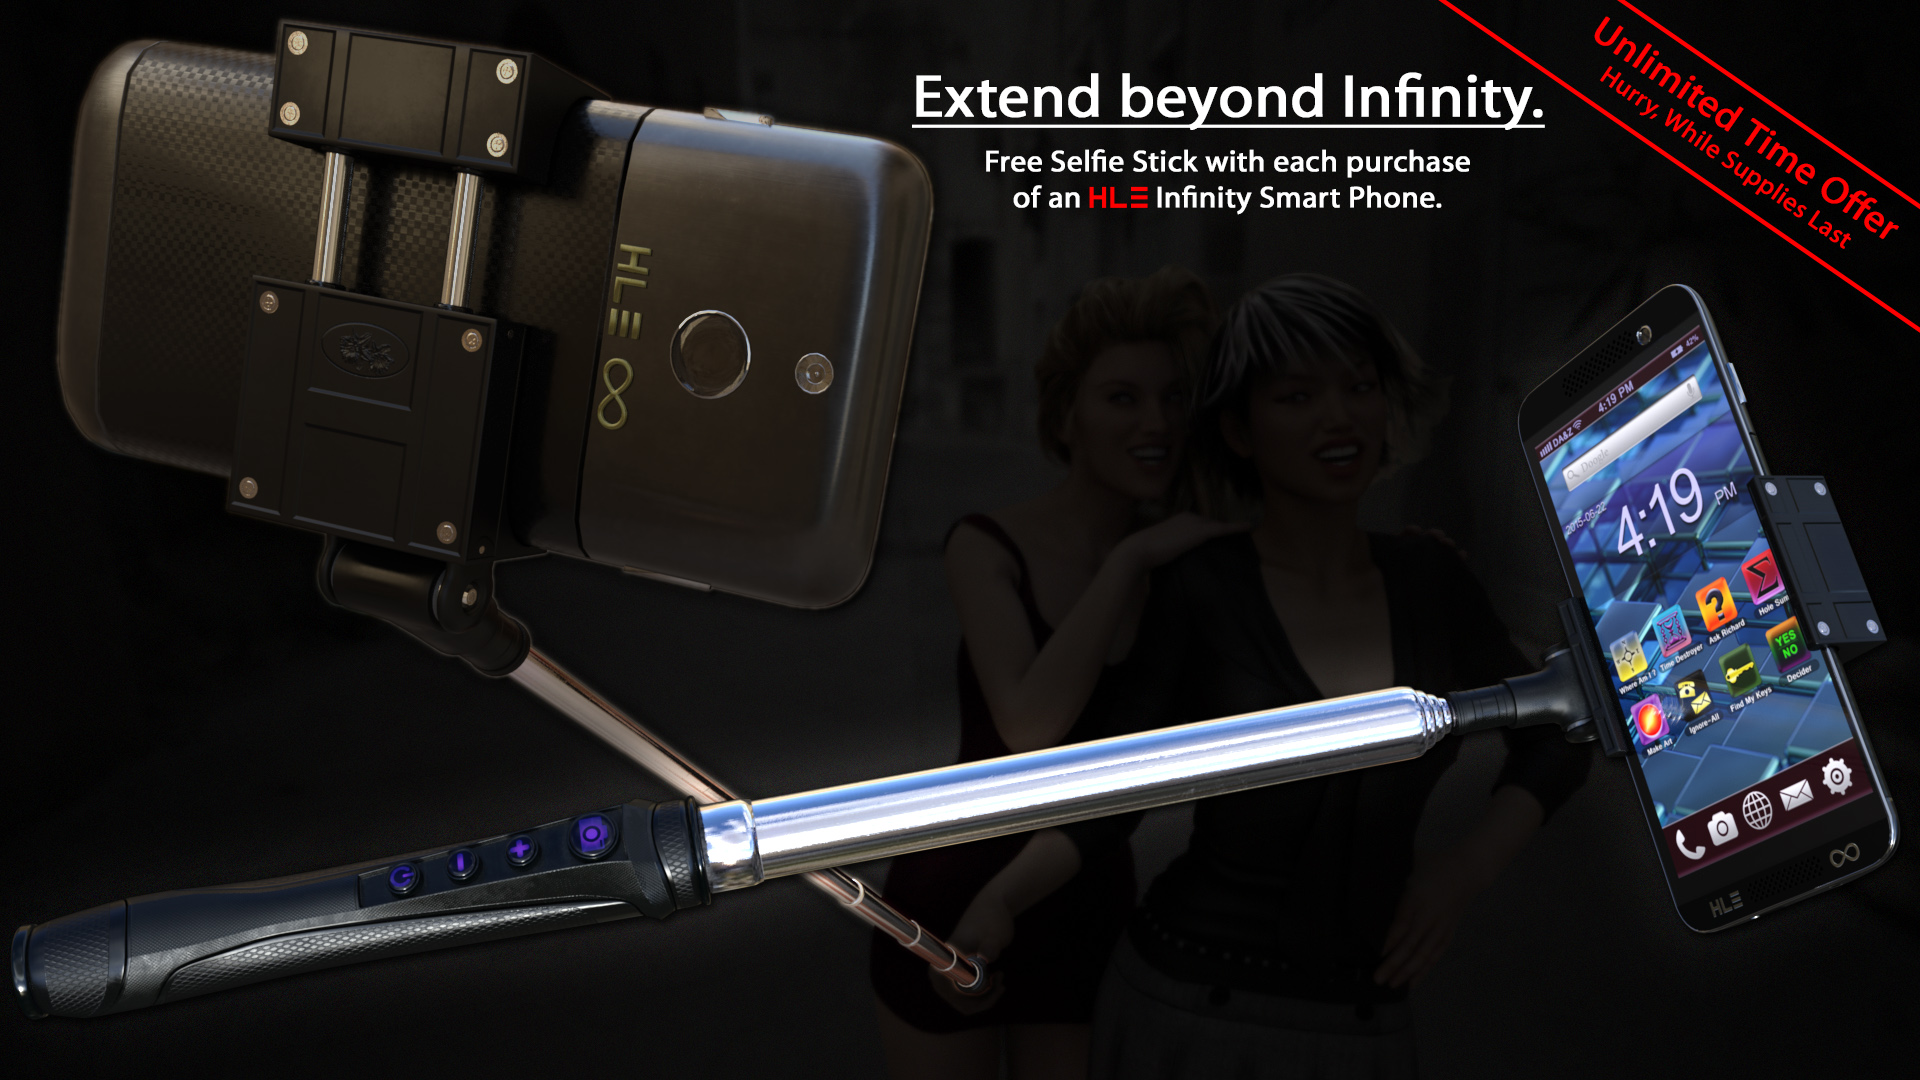 Selfie Stick and Smart Phone by: Hole, 3D Models by Daz 3D